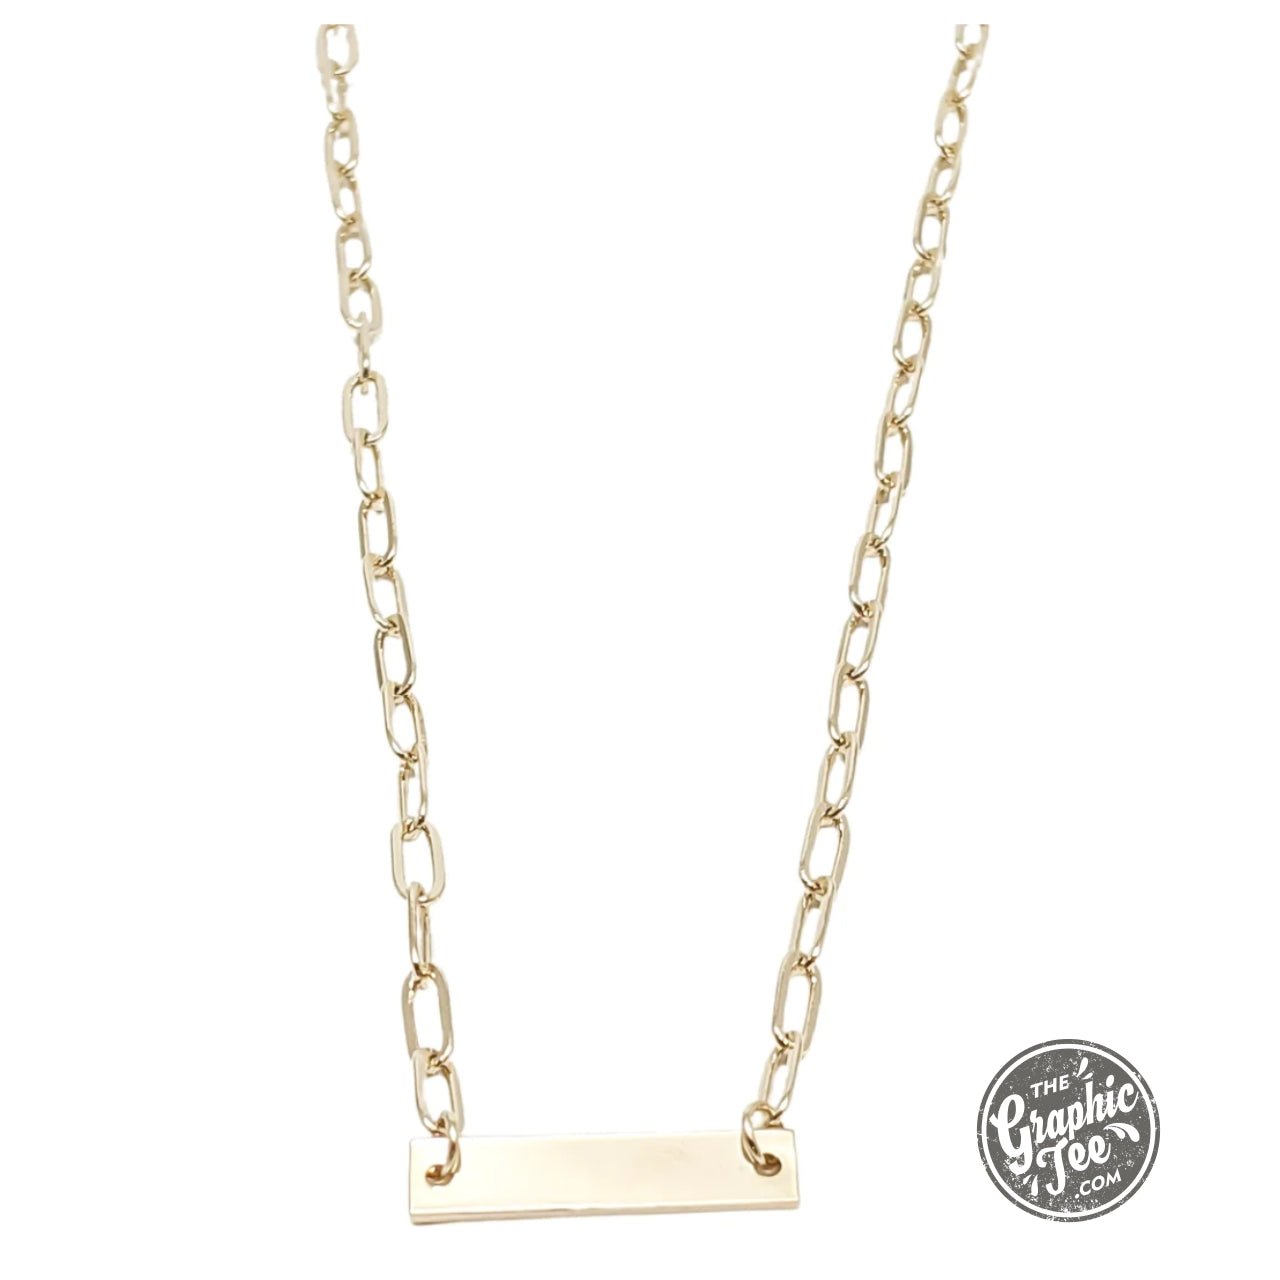 Davi Necklace - The Graphic Tee